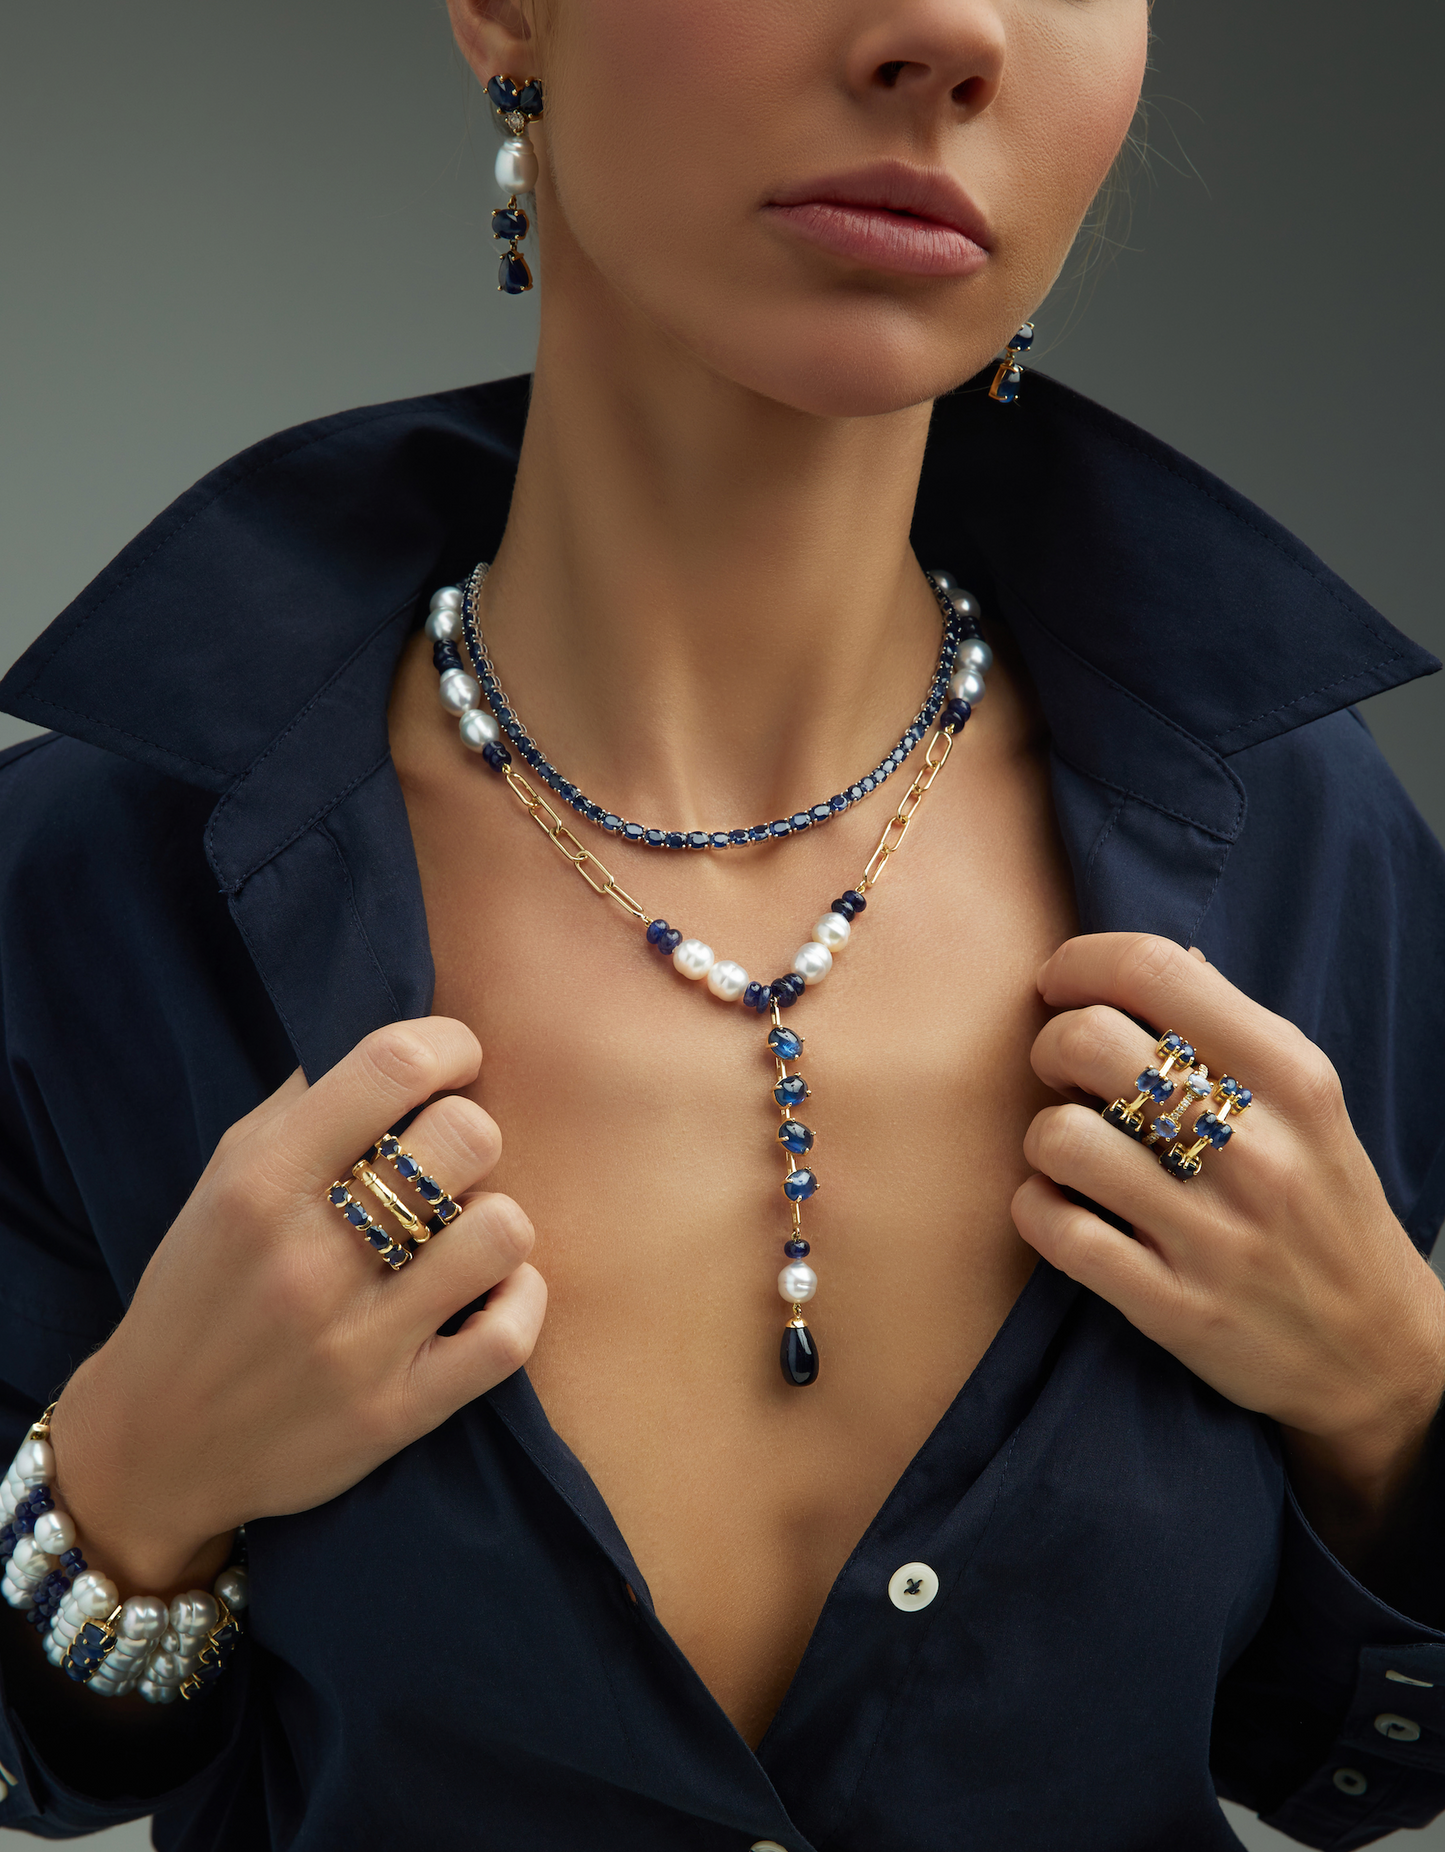 18KT Yellow Necklace with South Sea Pearls & Blue Sapphire